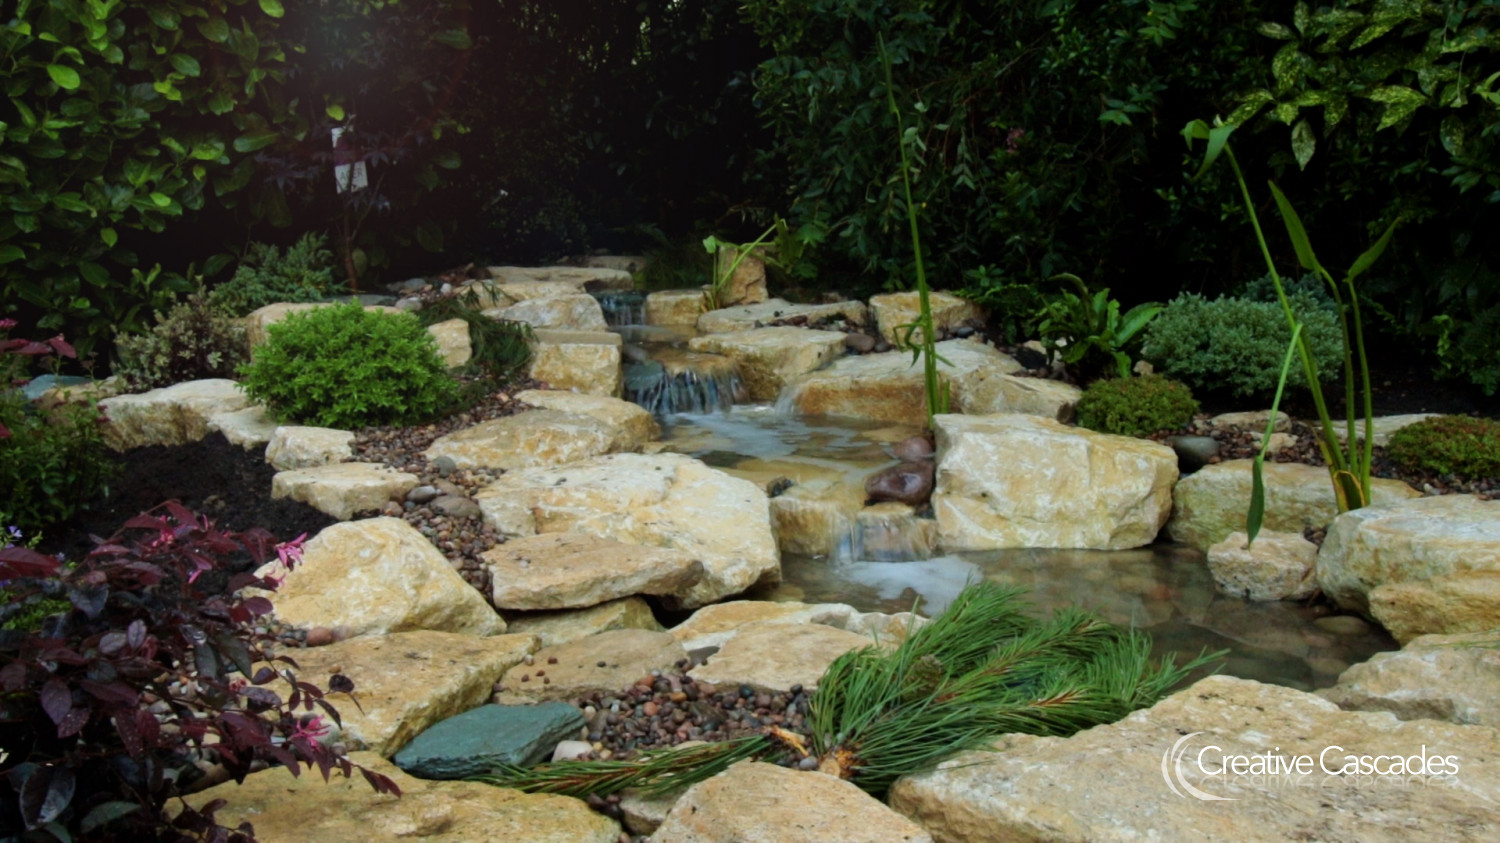 New waterfall - August 2021 in limestone  - Landscaping and Water Features -  Creative Cascades